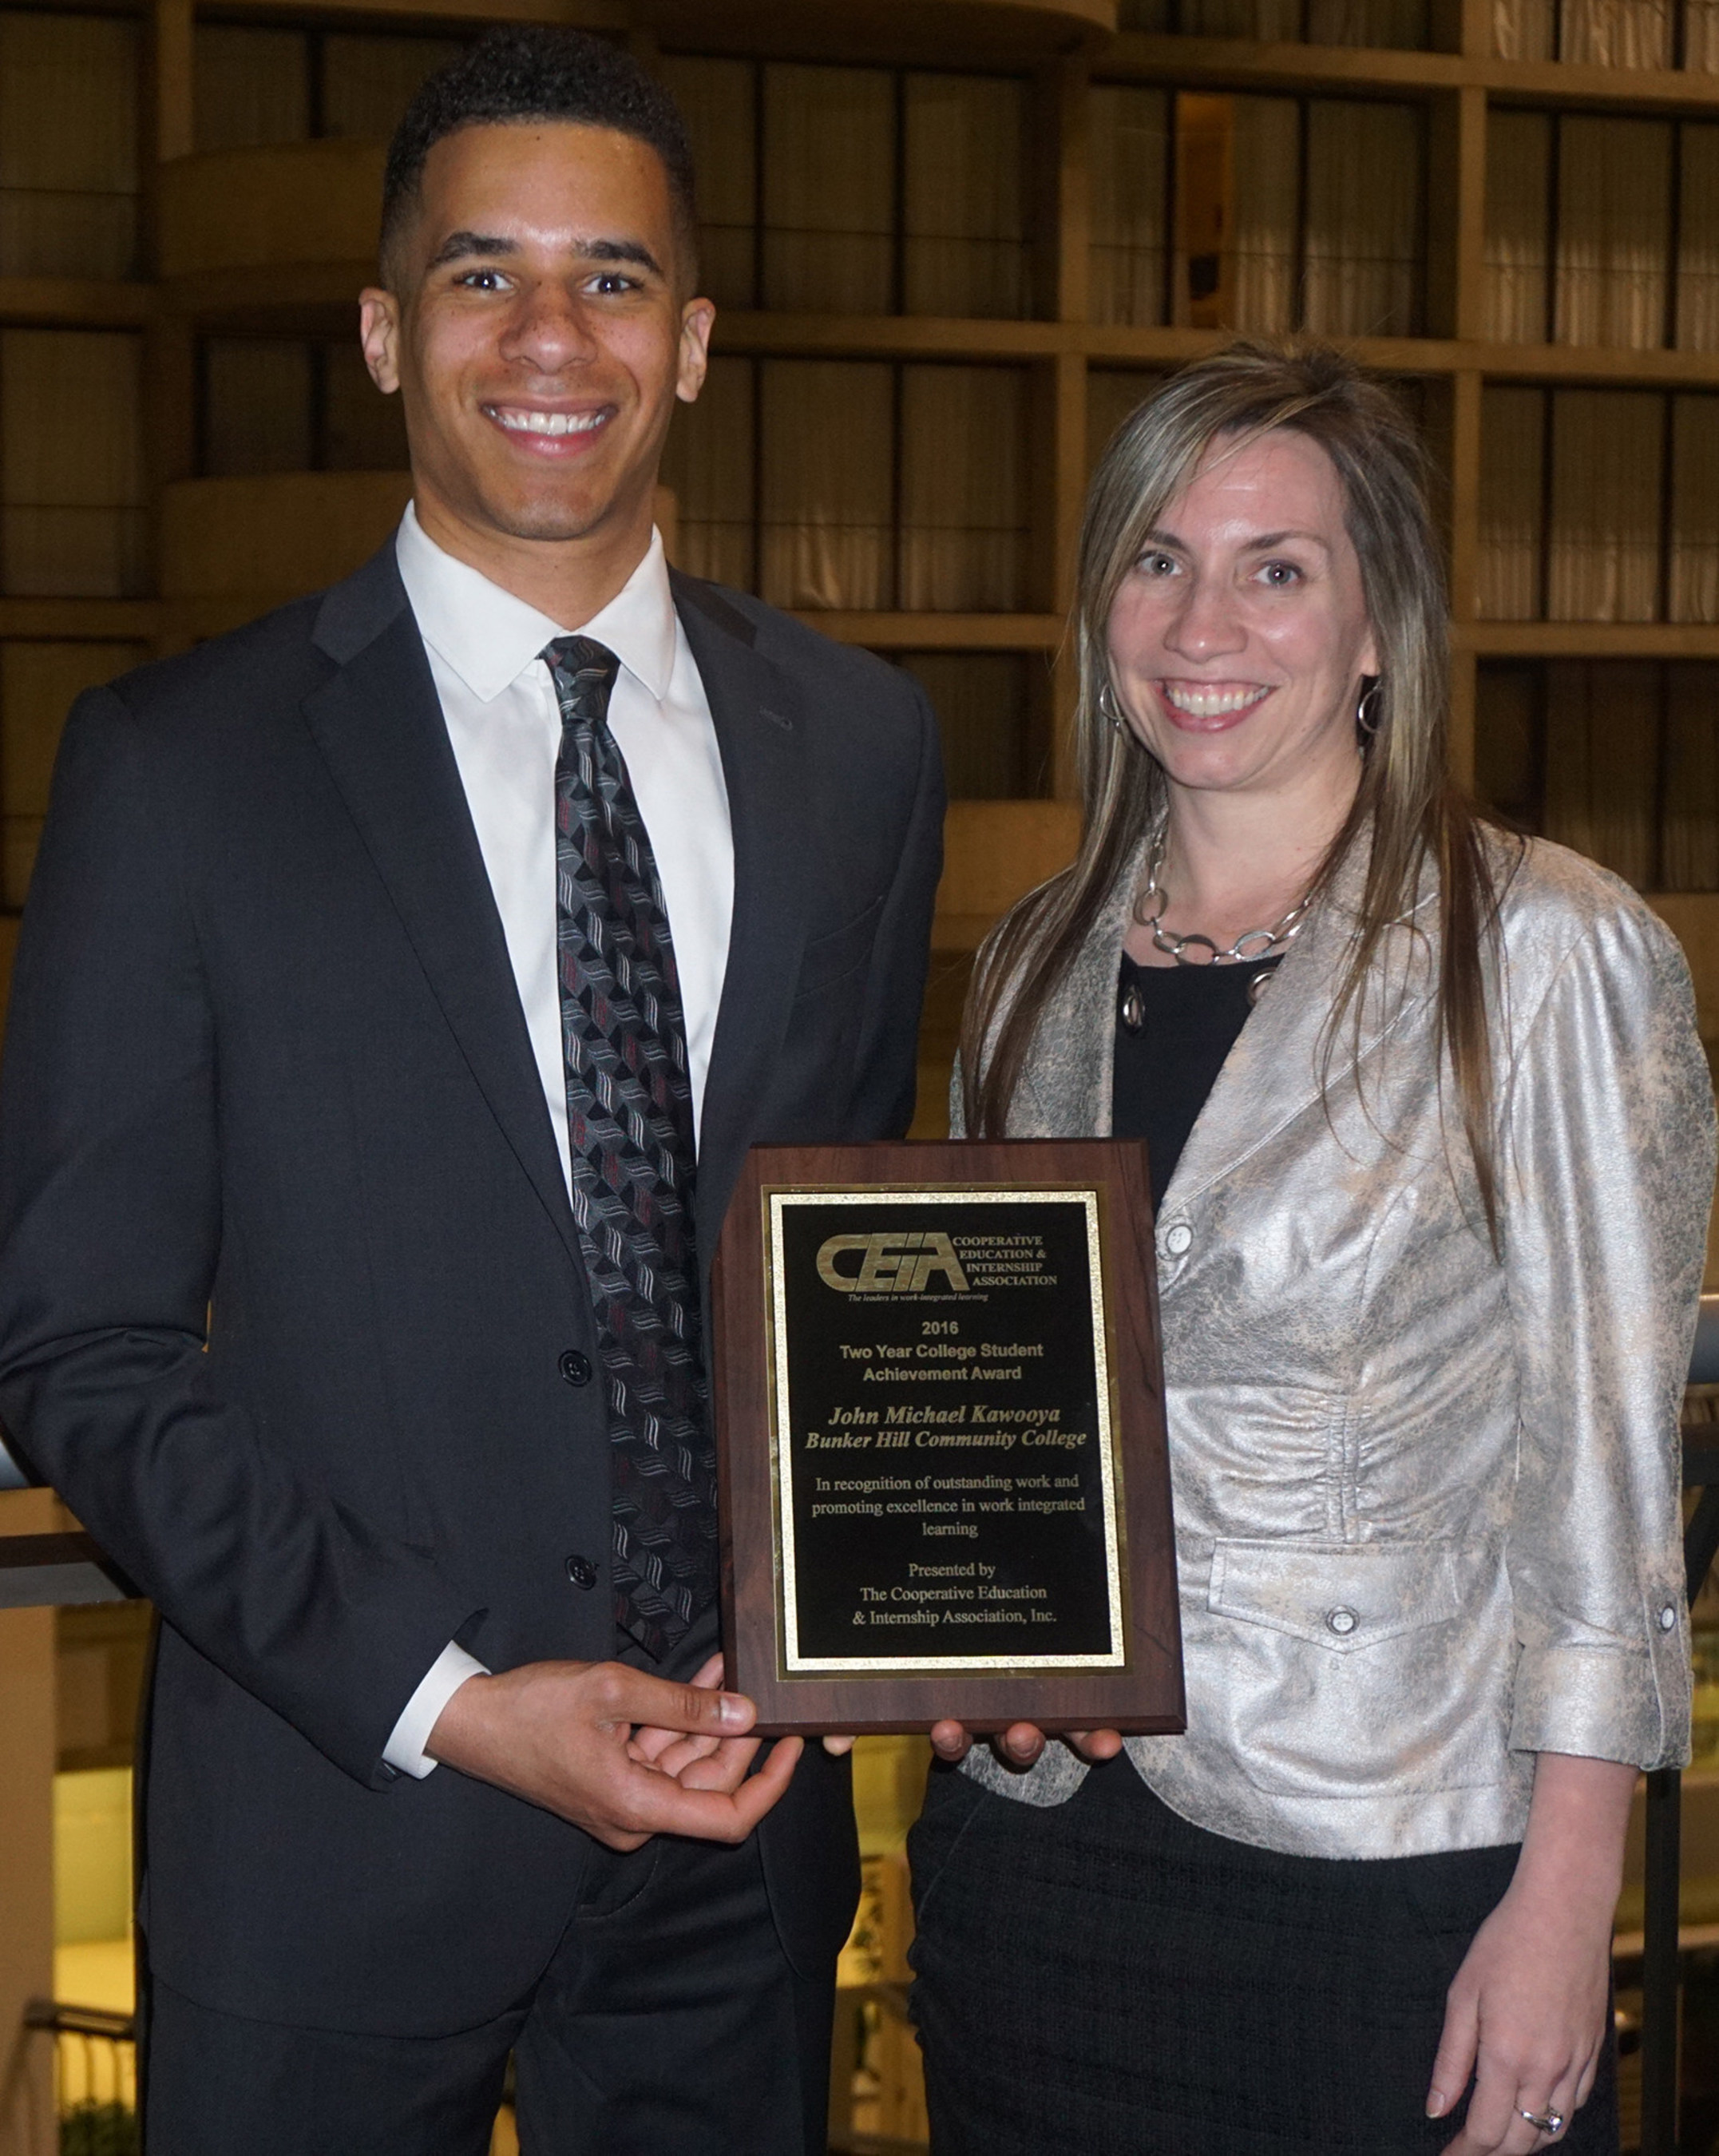 CEIA Award-winning student John Michael Kawooya with Sharon Schaff, Director of Career Advancement and Internships at Bunker Hill Community College.